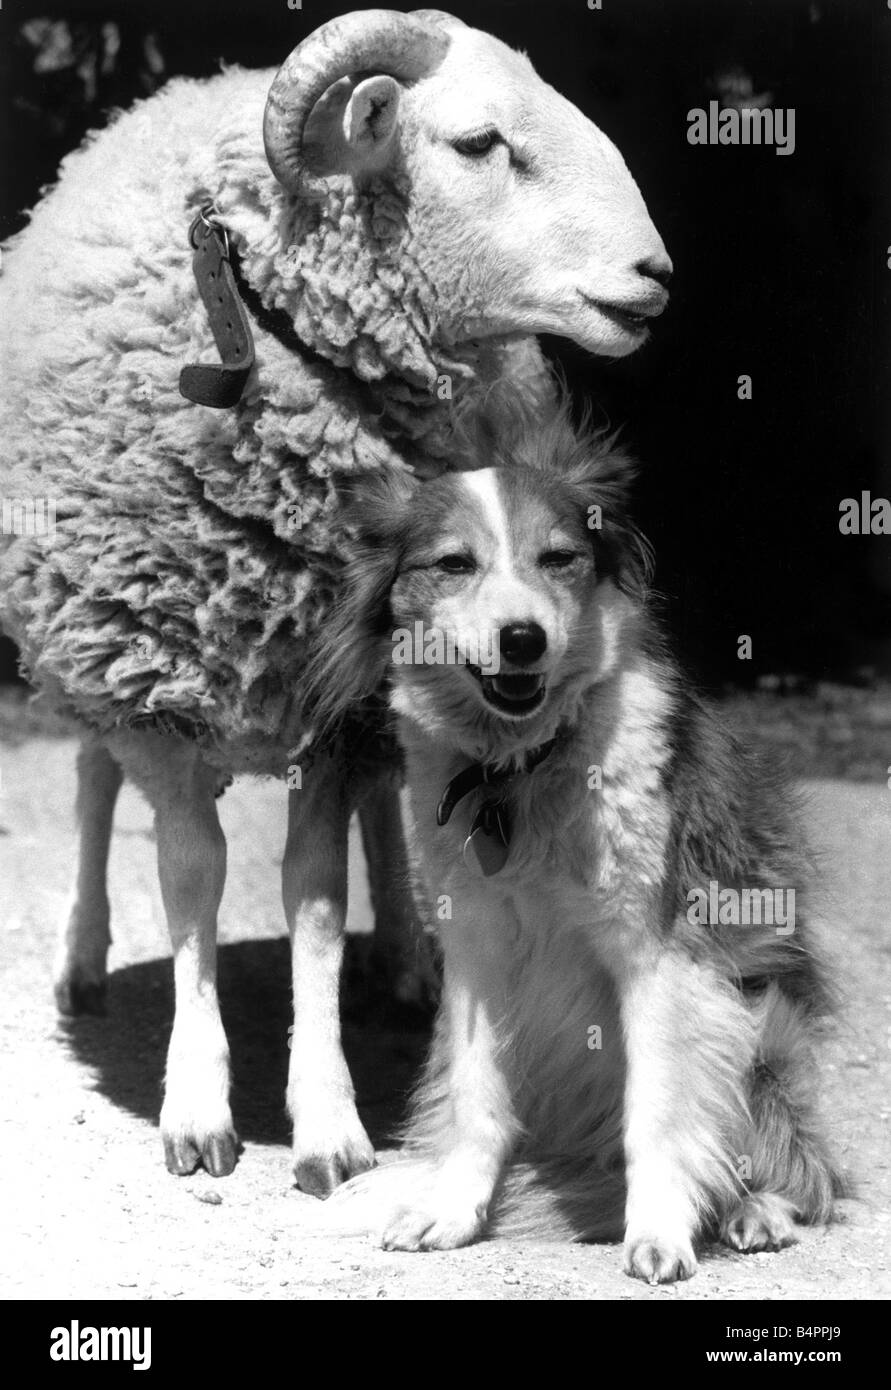 An unlikely friendship of dog and sheep Dog Welfare Centre Stokenchurch Buckinhamshire June 1985 Stock Photo